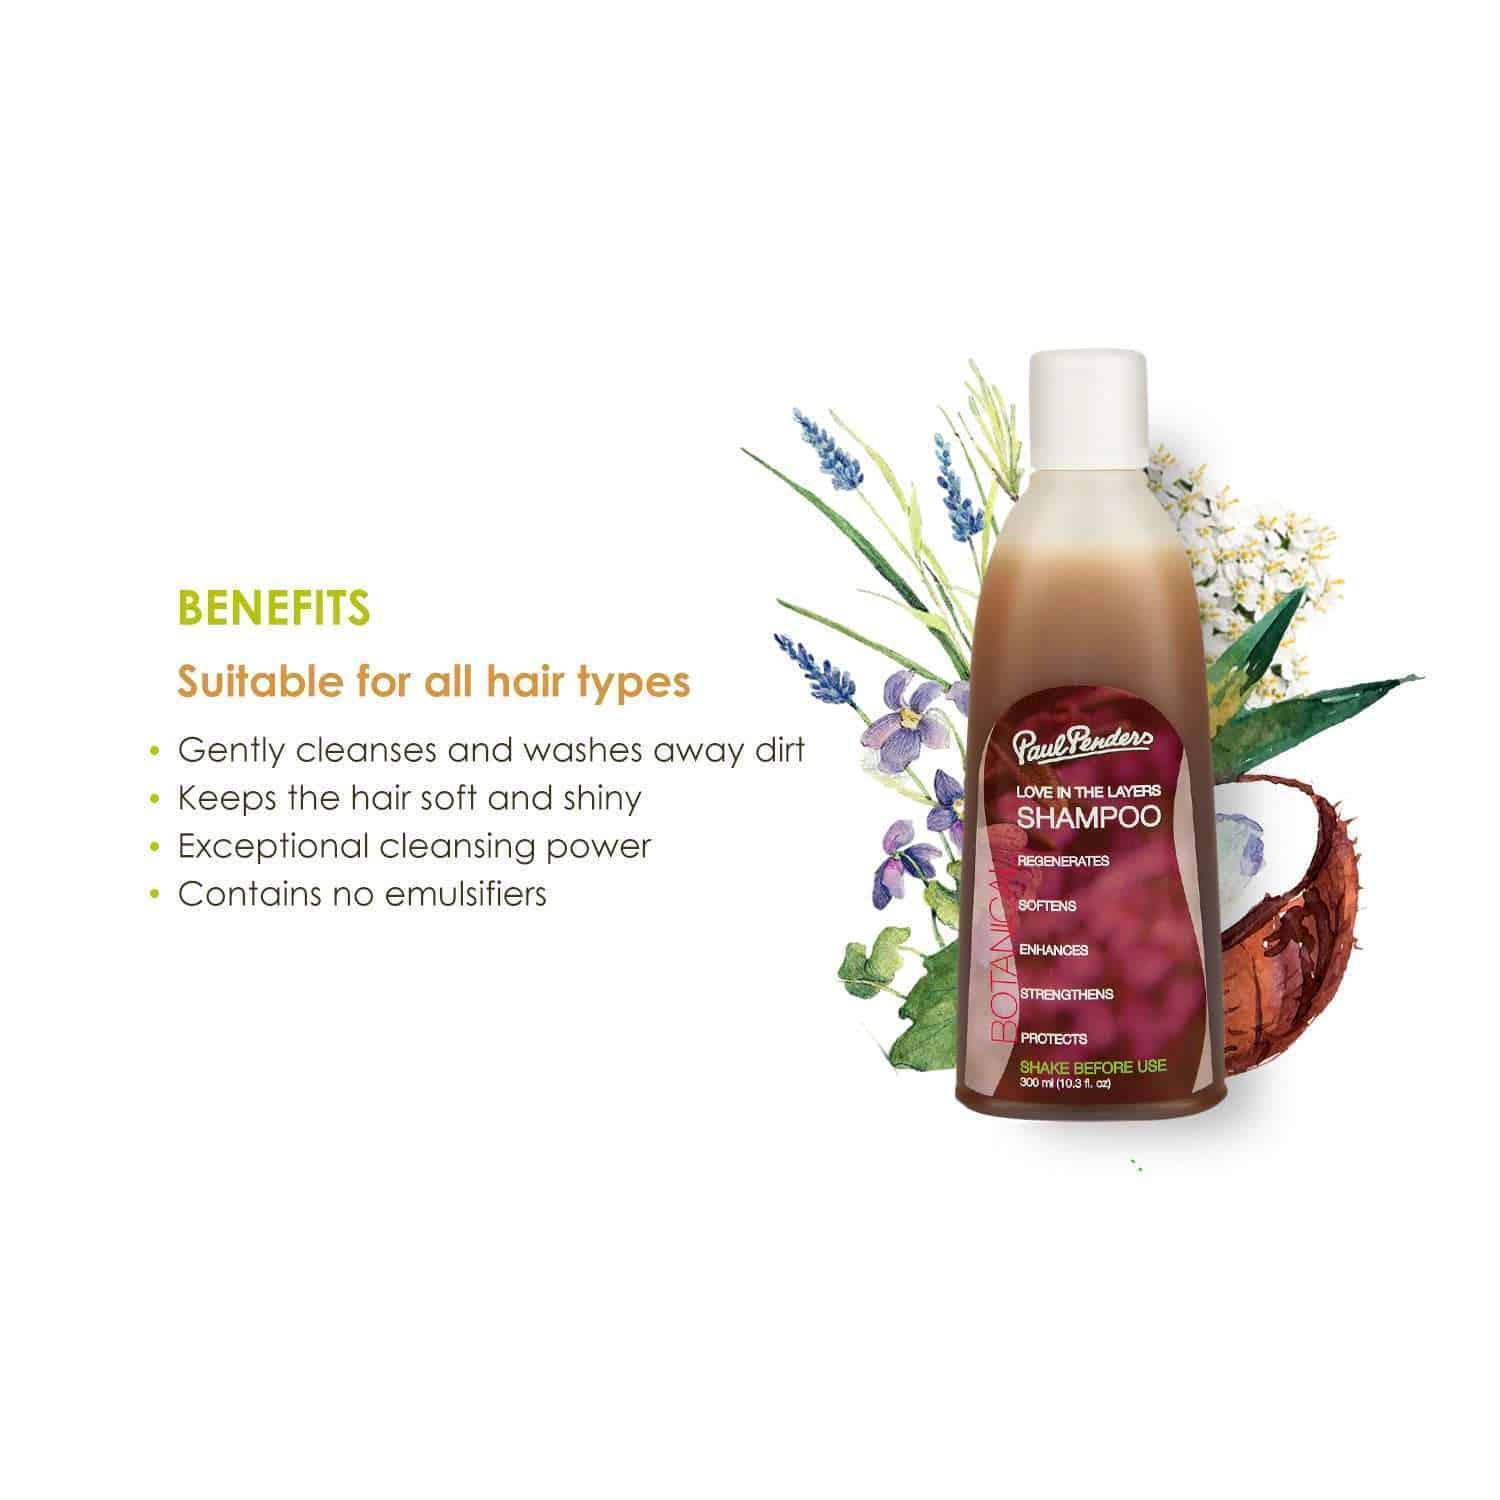 Paul Penders Love in the Layers Natural Shampoo For Soft, Shiny & Fuller Hair | Anti-Dandruff & Scalp Treatment 300ml